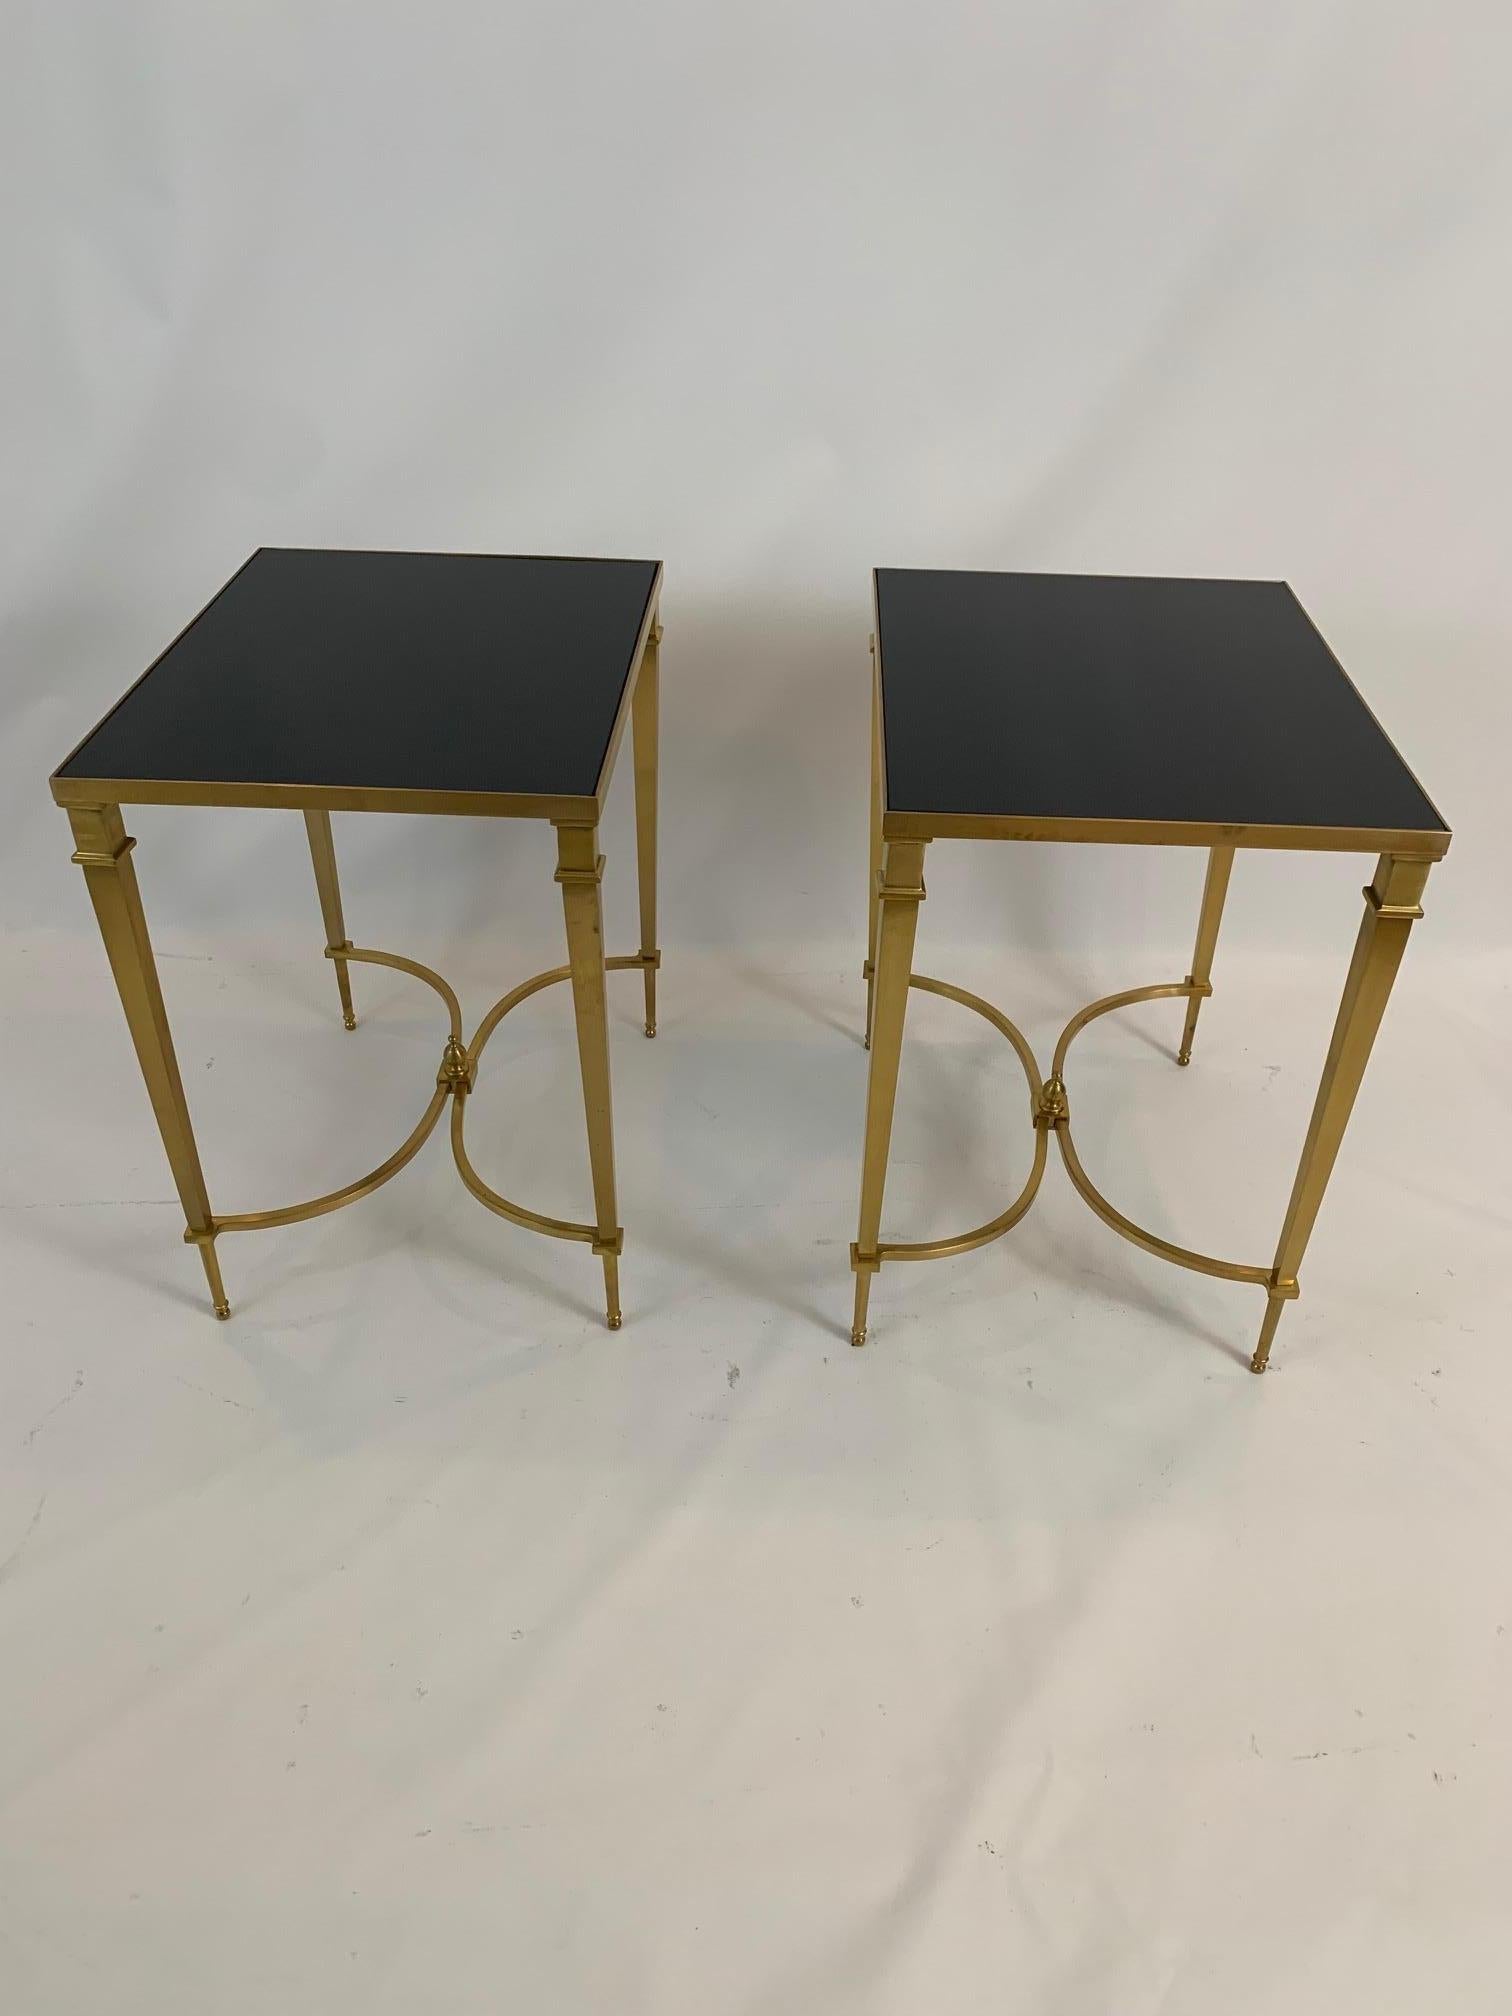 Very elegant sophisticated pair of French Maison Jansen style end tables having square leg brass bases and contrasting black granite tops.

 